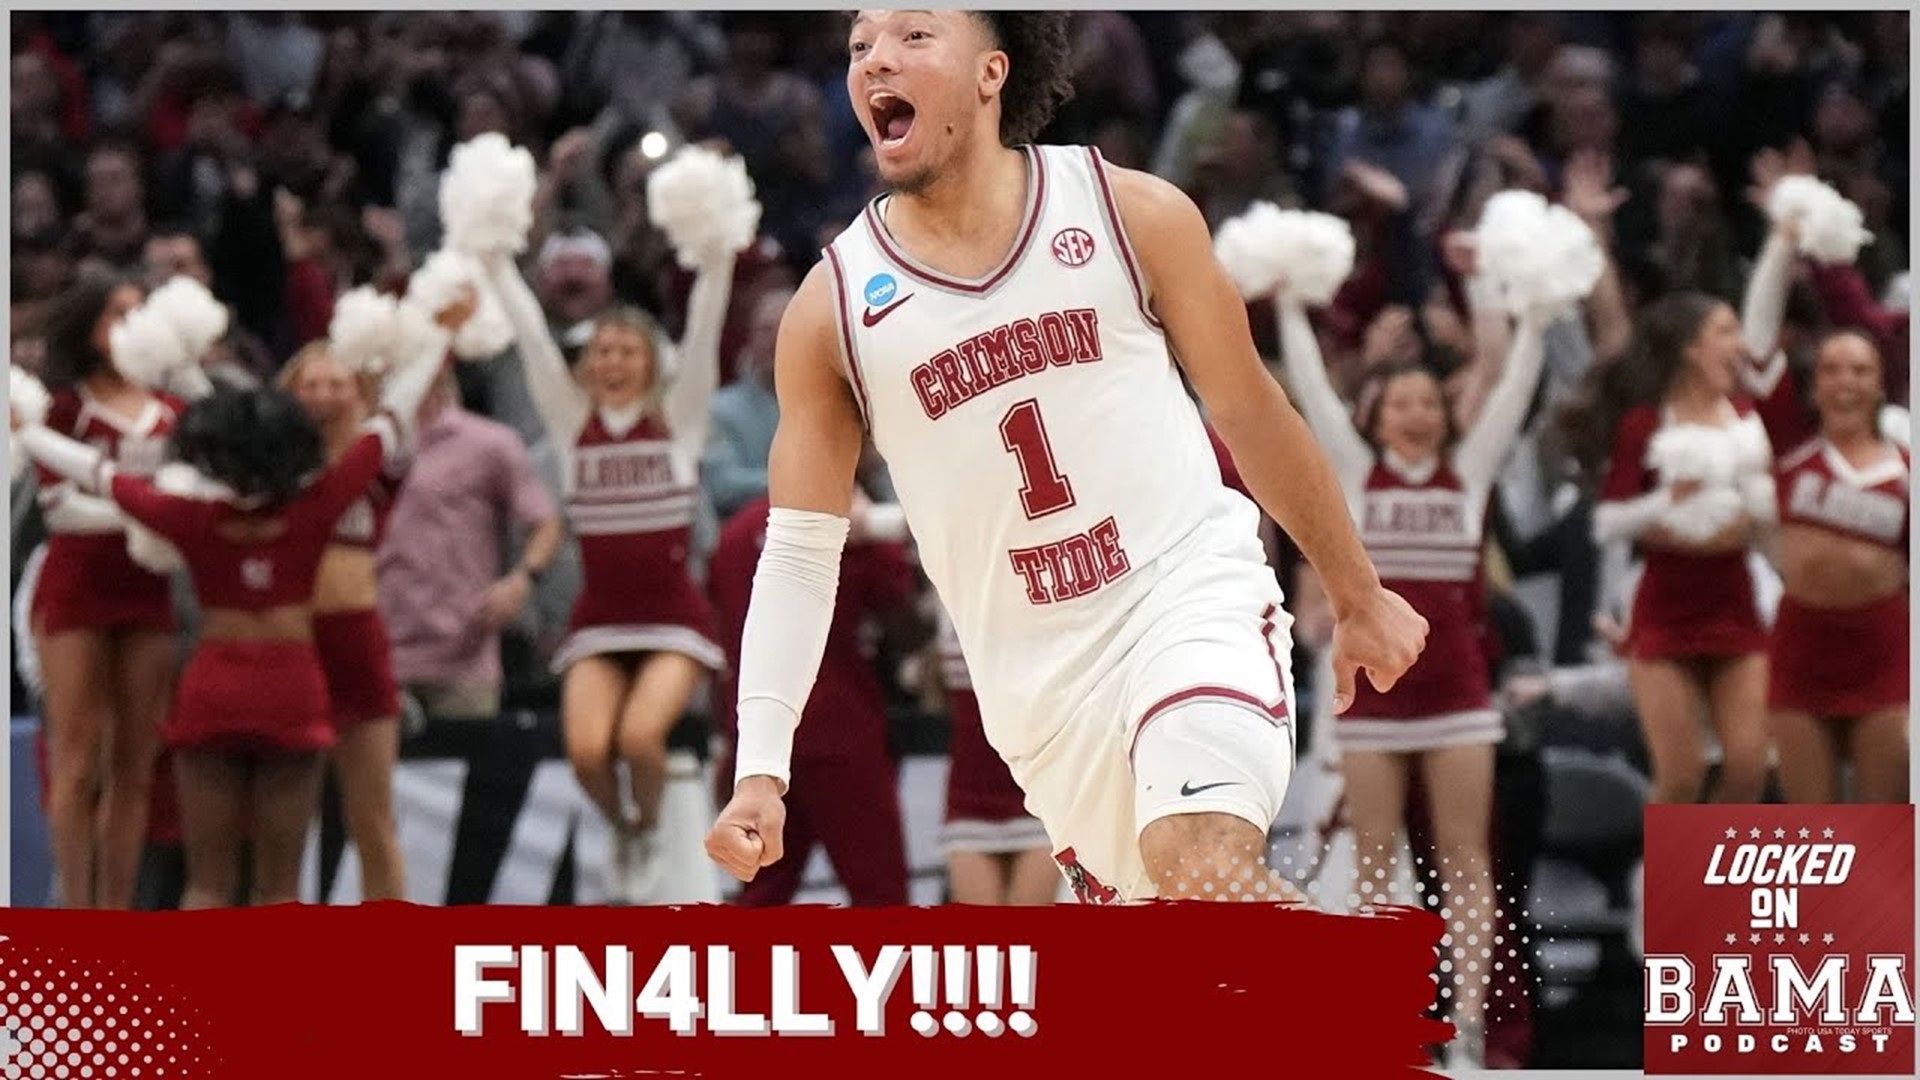 It took a long time- the entire existence of the University to be exact but Alabama men's basketball is headed to the Final Four! Let's celebrate! Roll Tide!